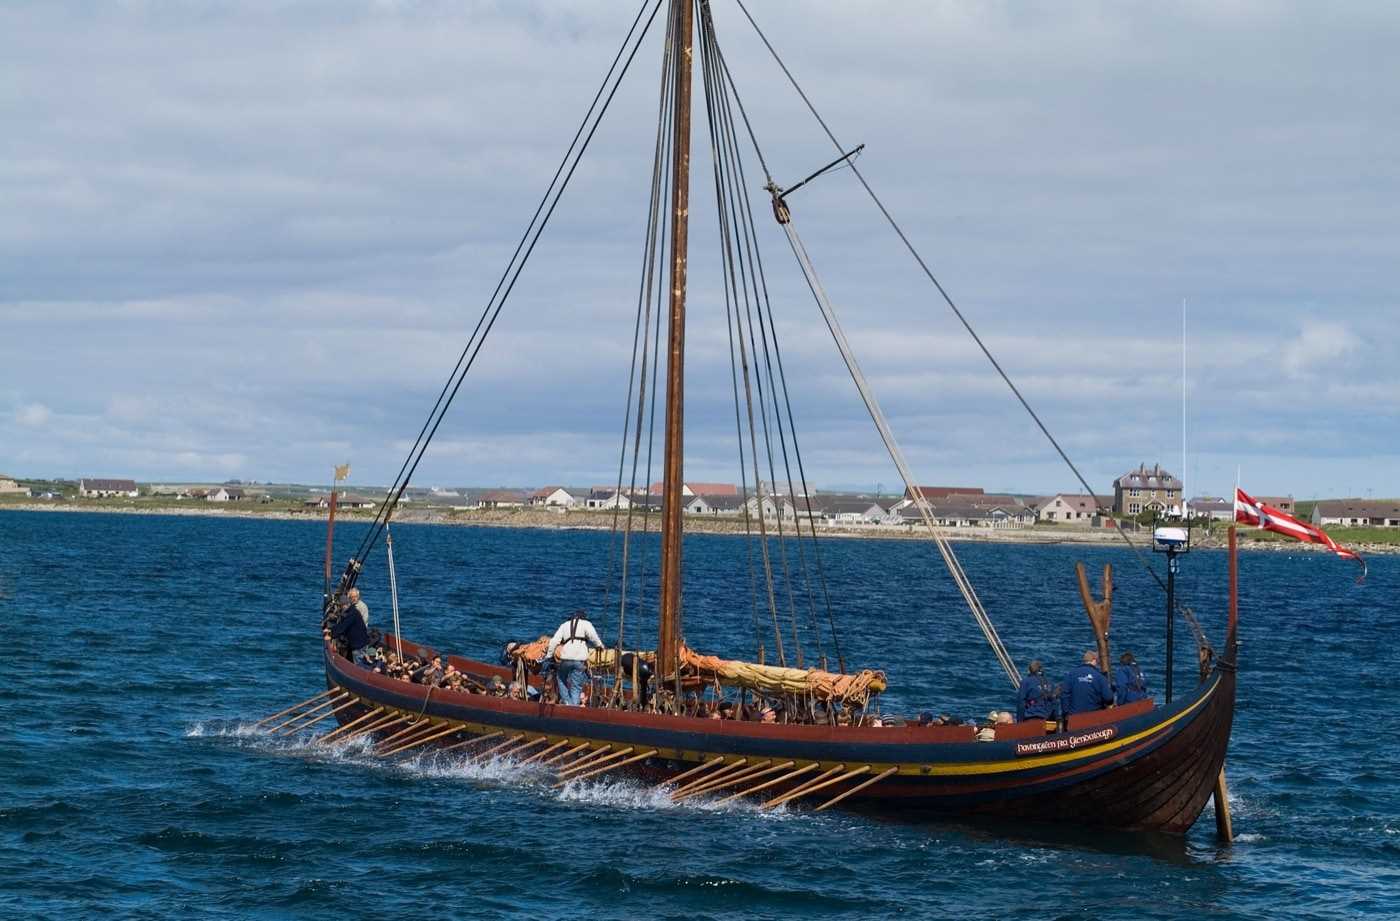 A viking longship in action, manned by a full crew of rowers and flying the flag of Denmark